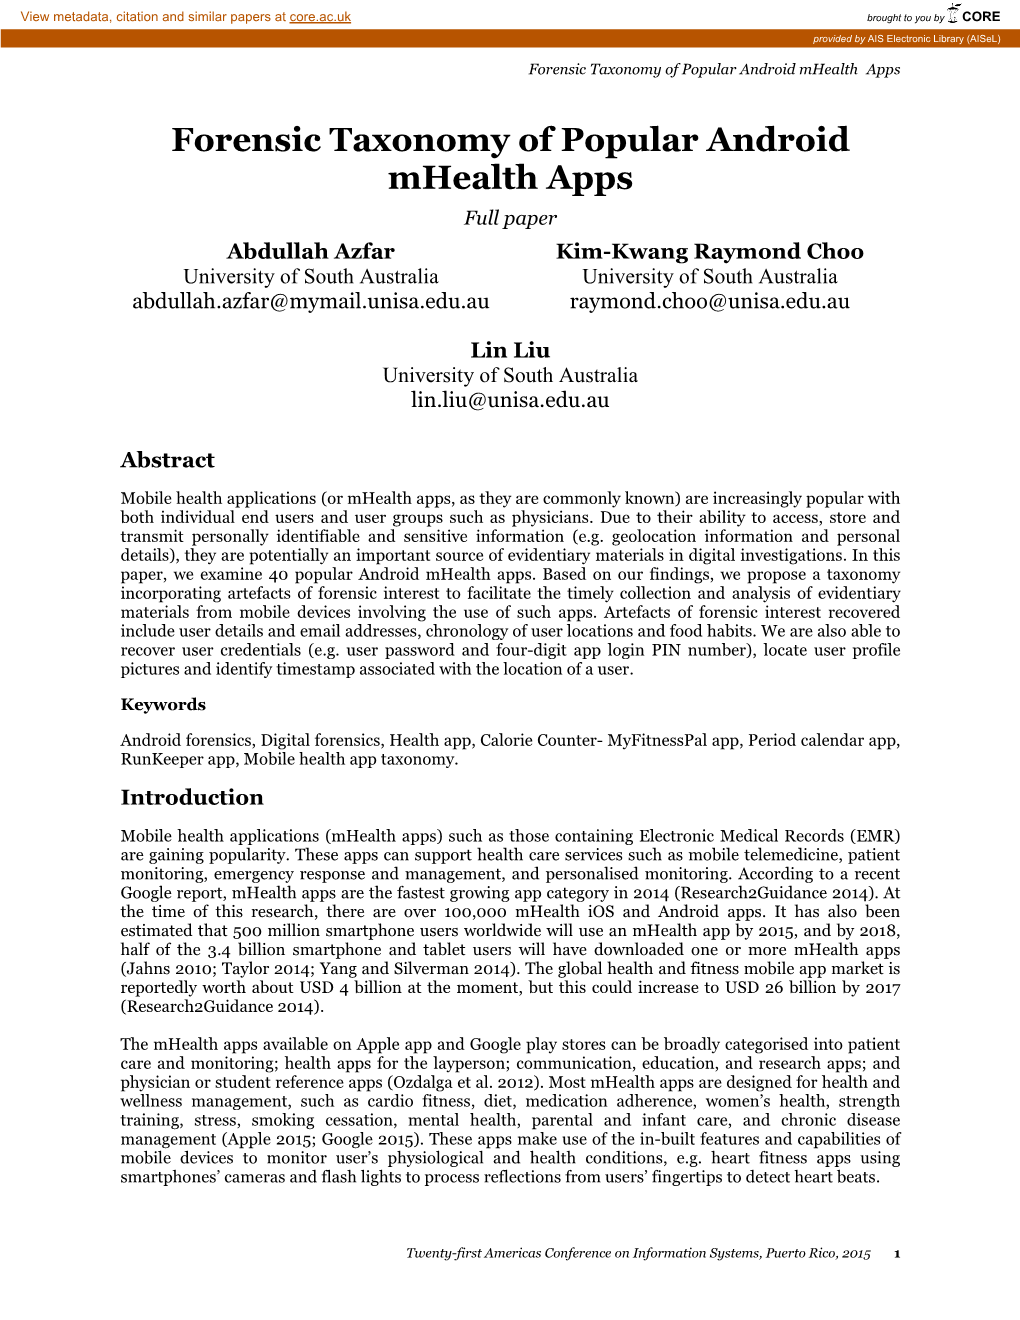 Forensic Taxonomy of Popular Android Mhealth Apps